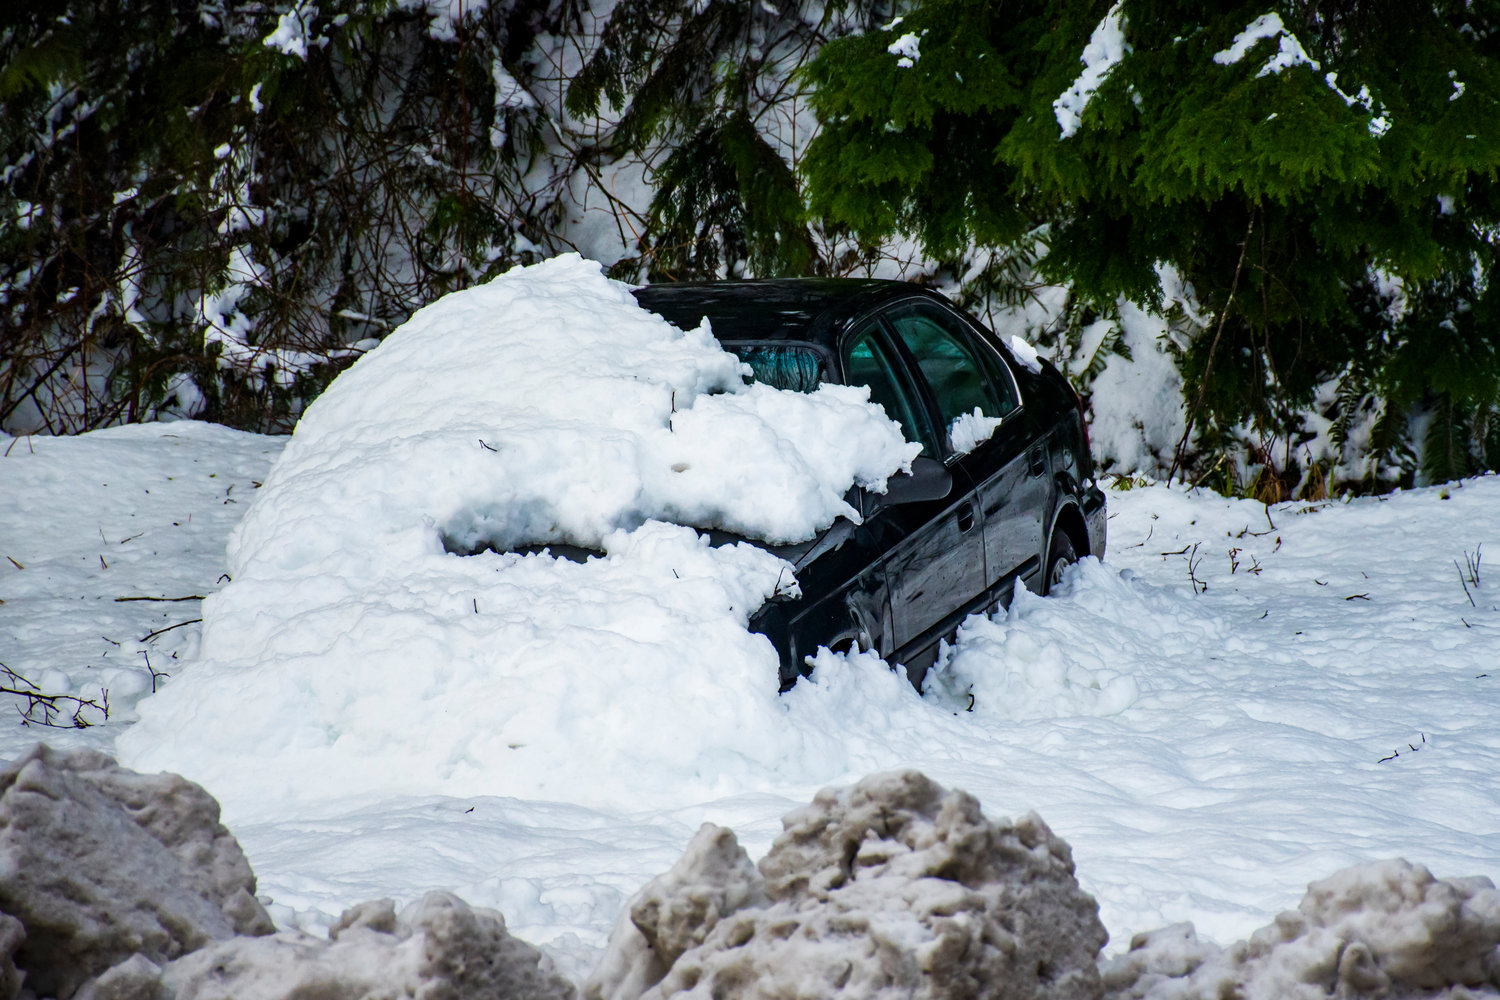 A car is seen buried in snow off the side of Highway 12 Wednesday morning in Morton.